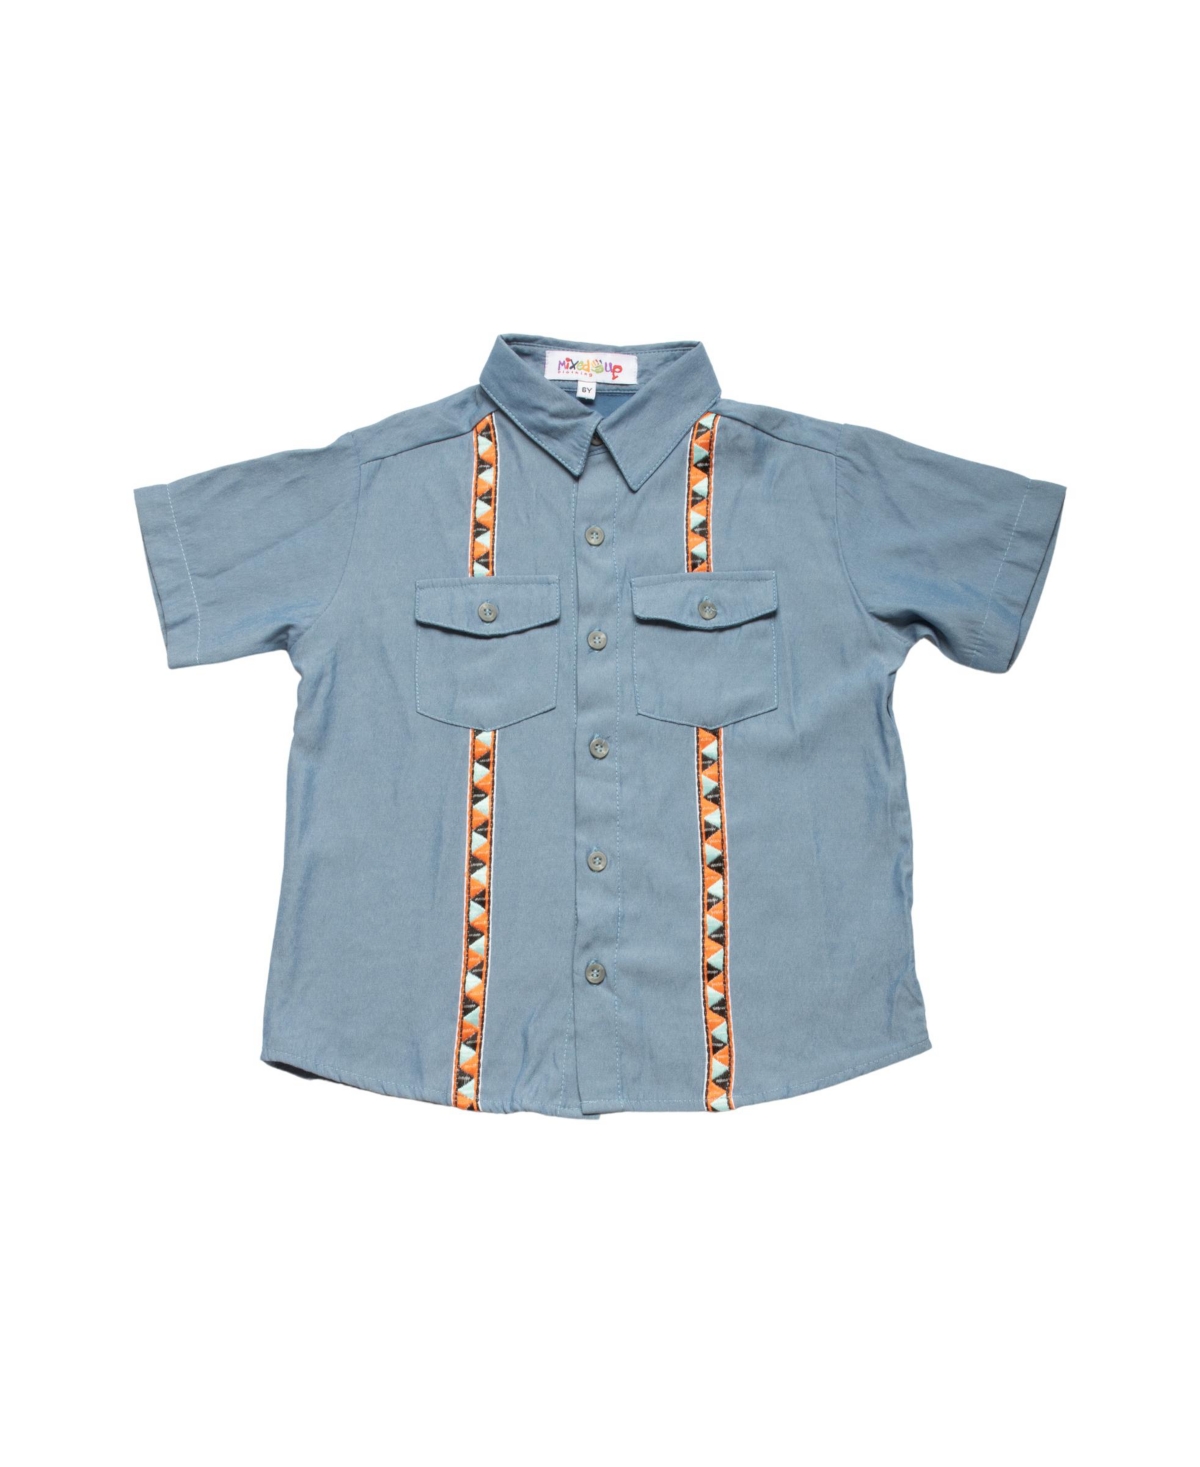 Mixed Up Clothing Toddler Boys Short Sleeves Button Down Pocket Shirt In Light Blue